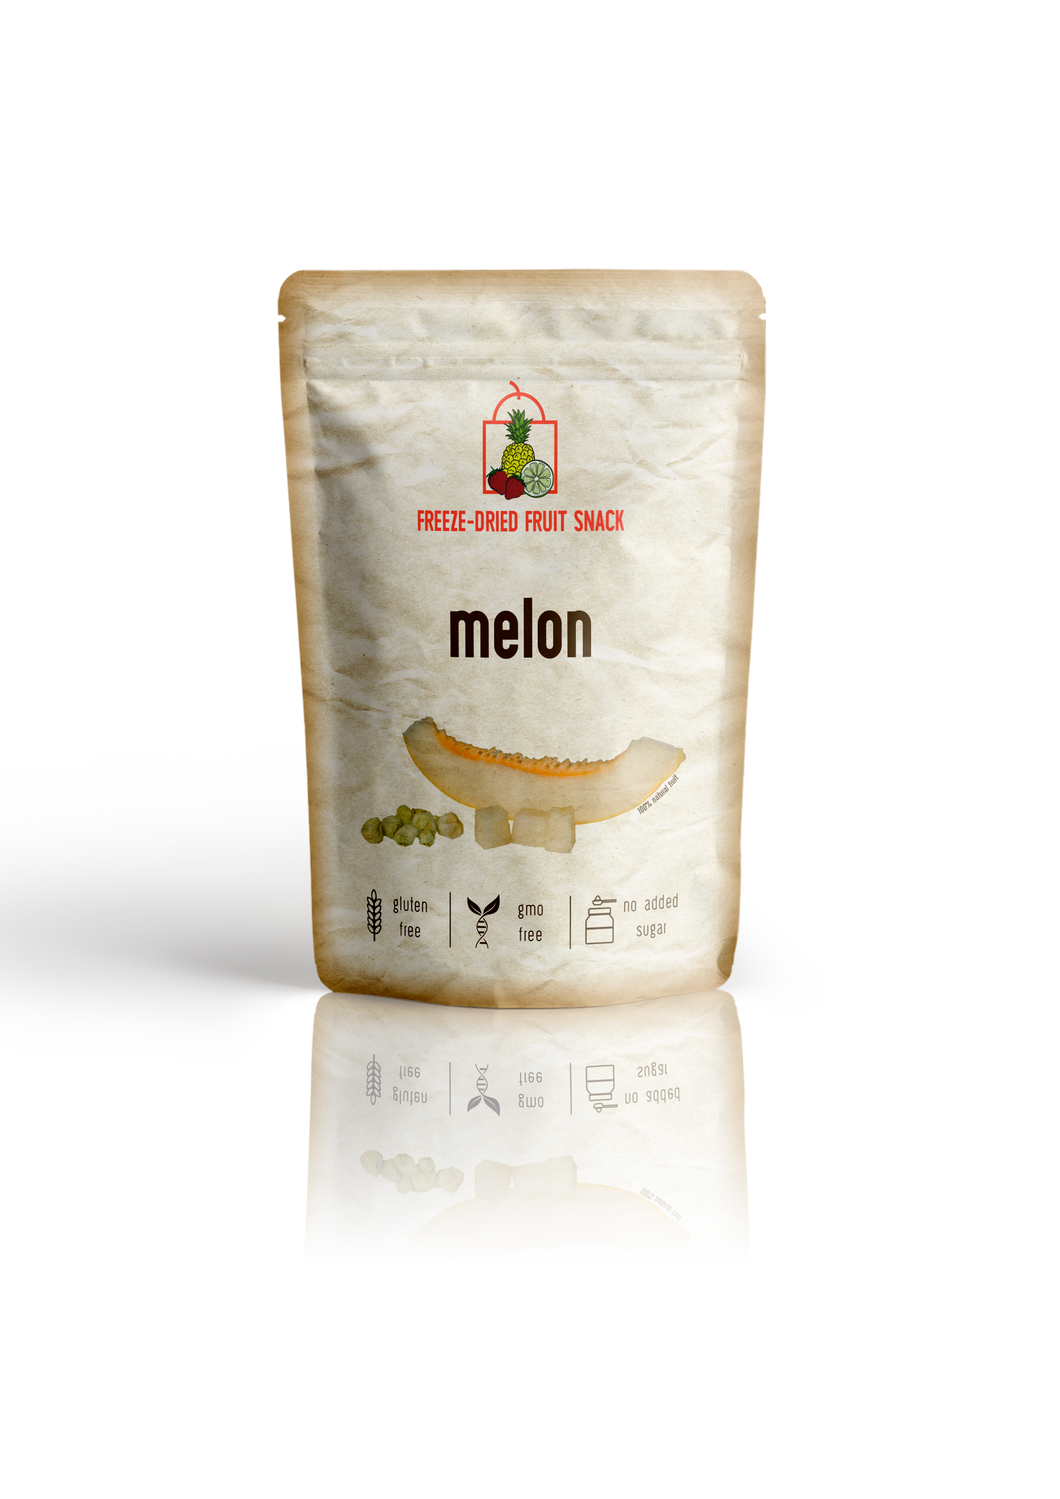 The Rotten Fruit Box Freeze Dried Melon Snack Pouch